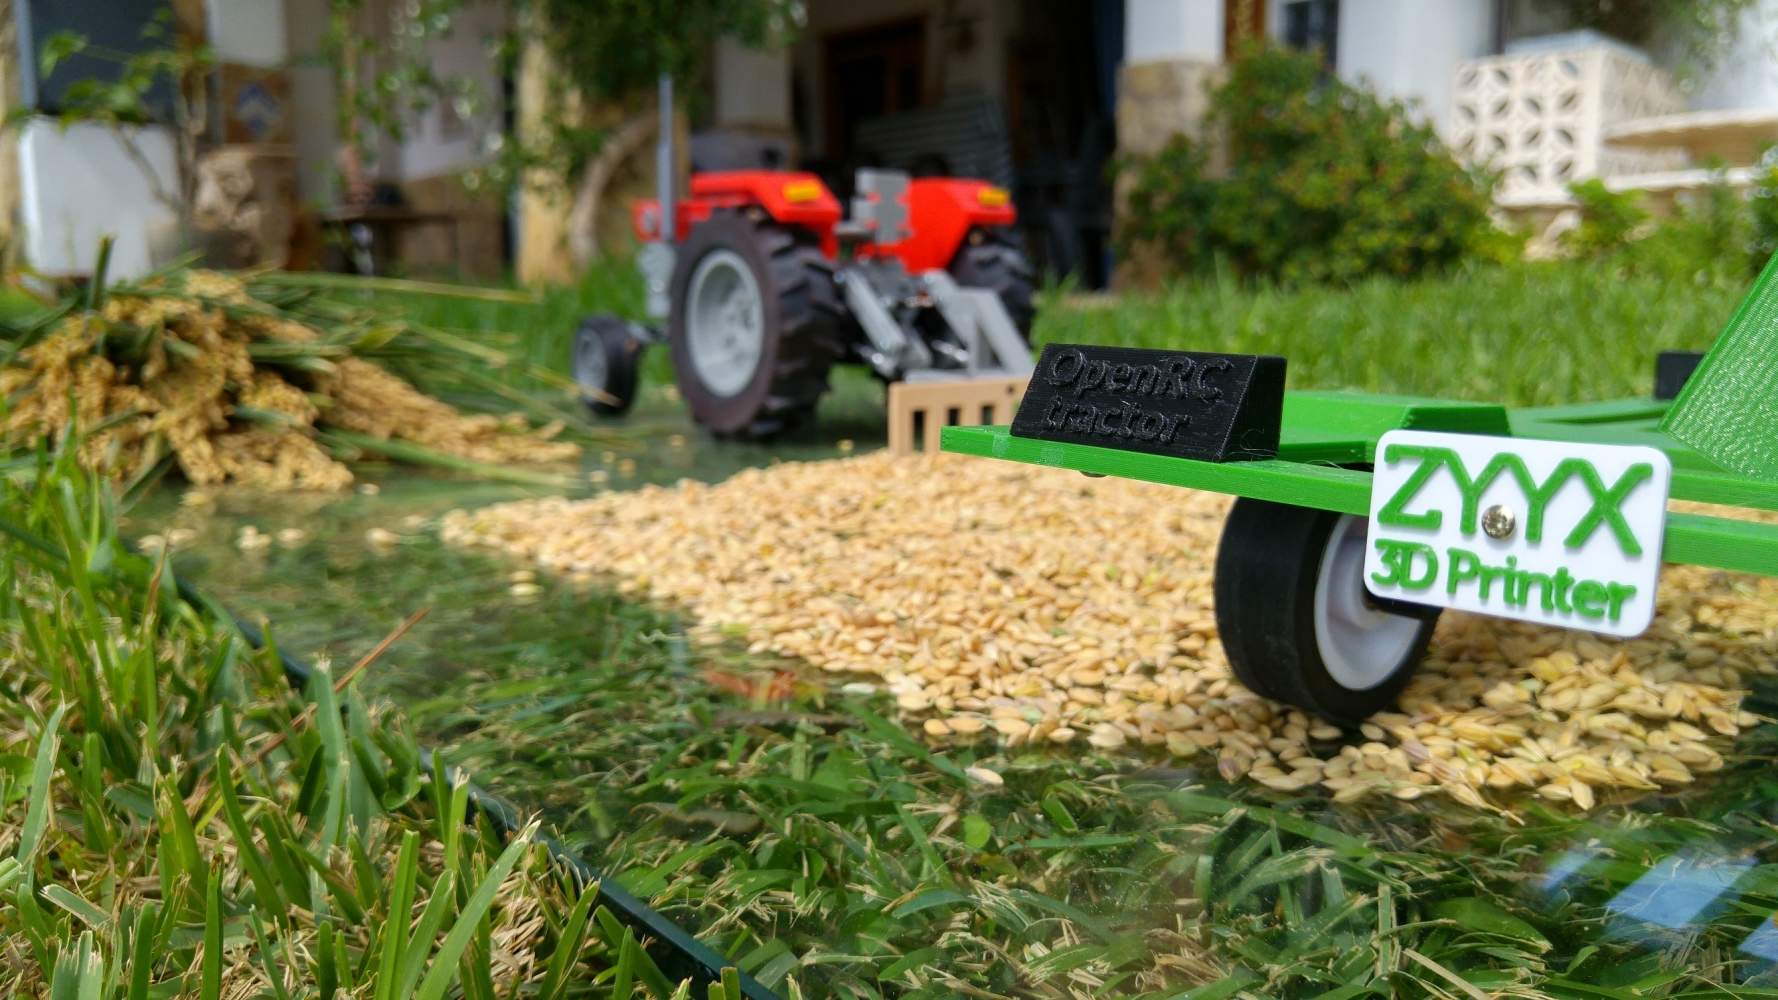 1000x1000 openrc tractor release zyyx